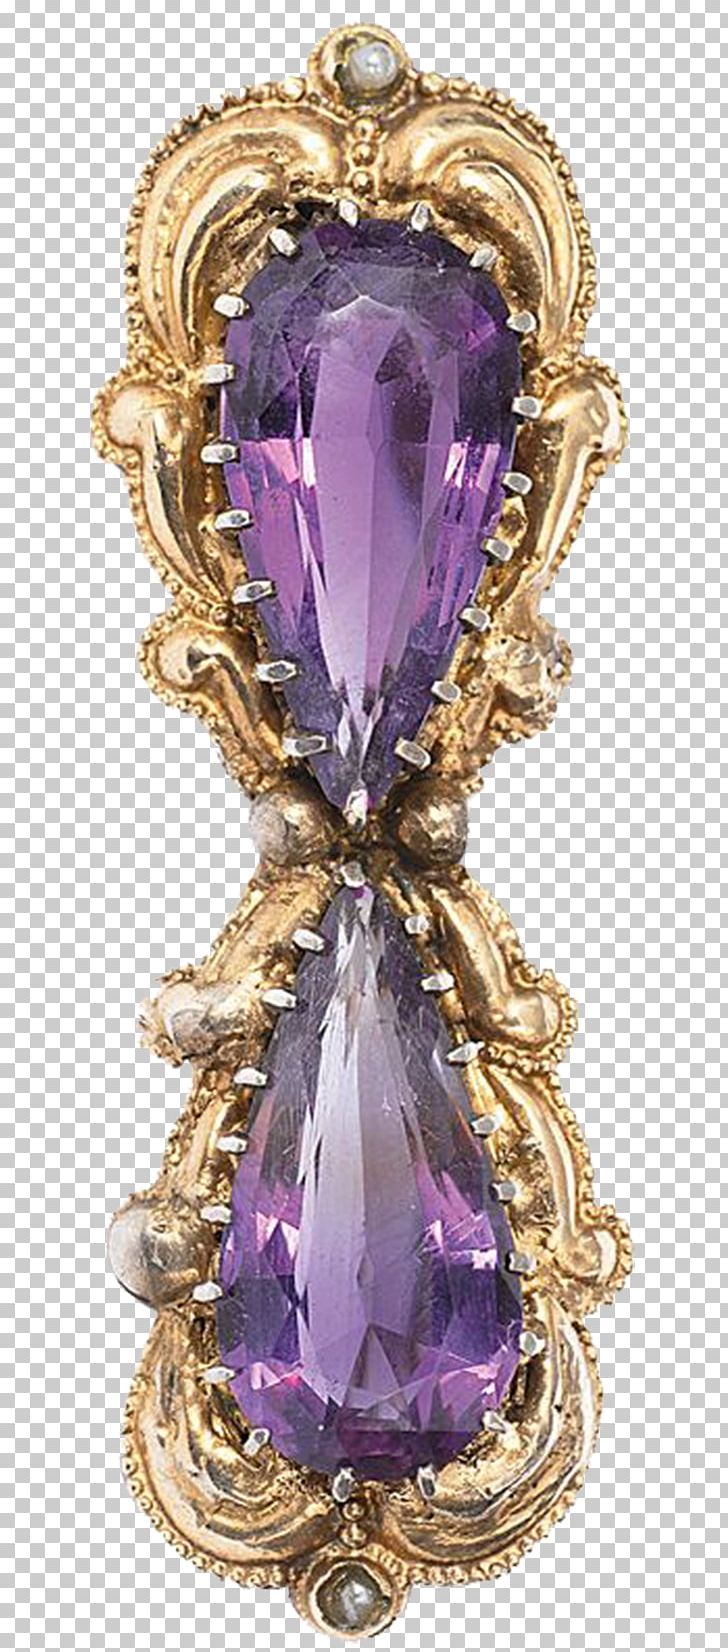 Amethyst Gemstone Jewellery Purple Diamond PNG, Clipart, Amethyst, Amulet, Birthstone, Bow, Bow And Arrow Free PNG Download